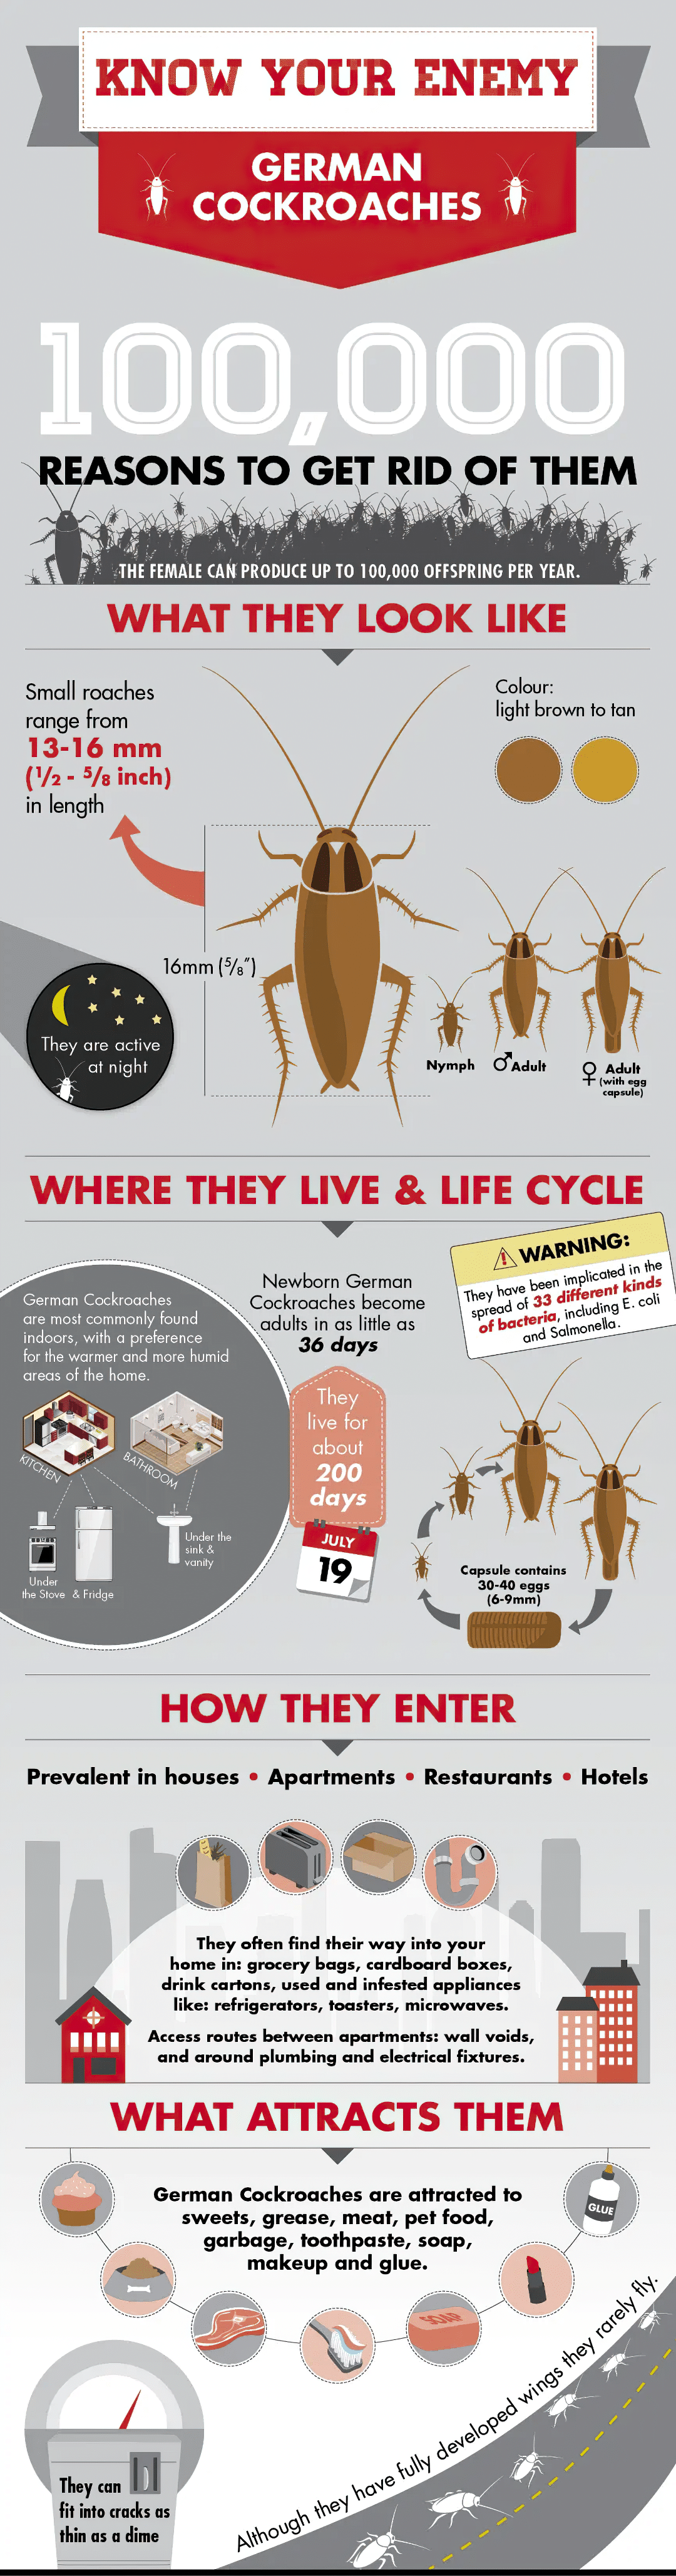 The German Cockroach Life Cycle and Why They Are So Hard to Eliminate